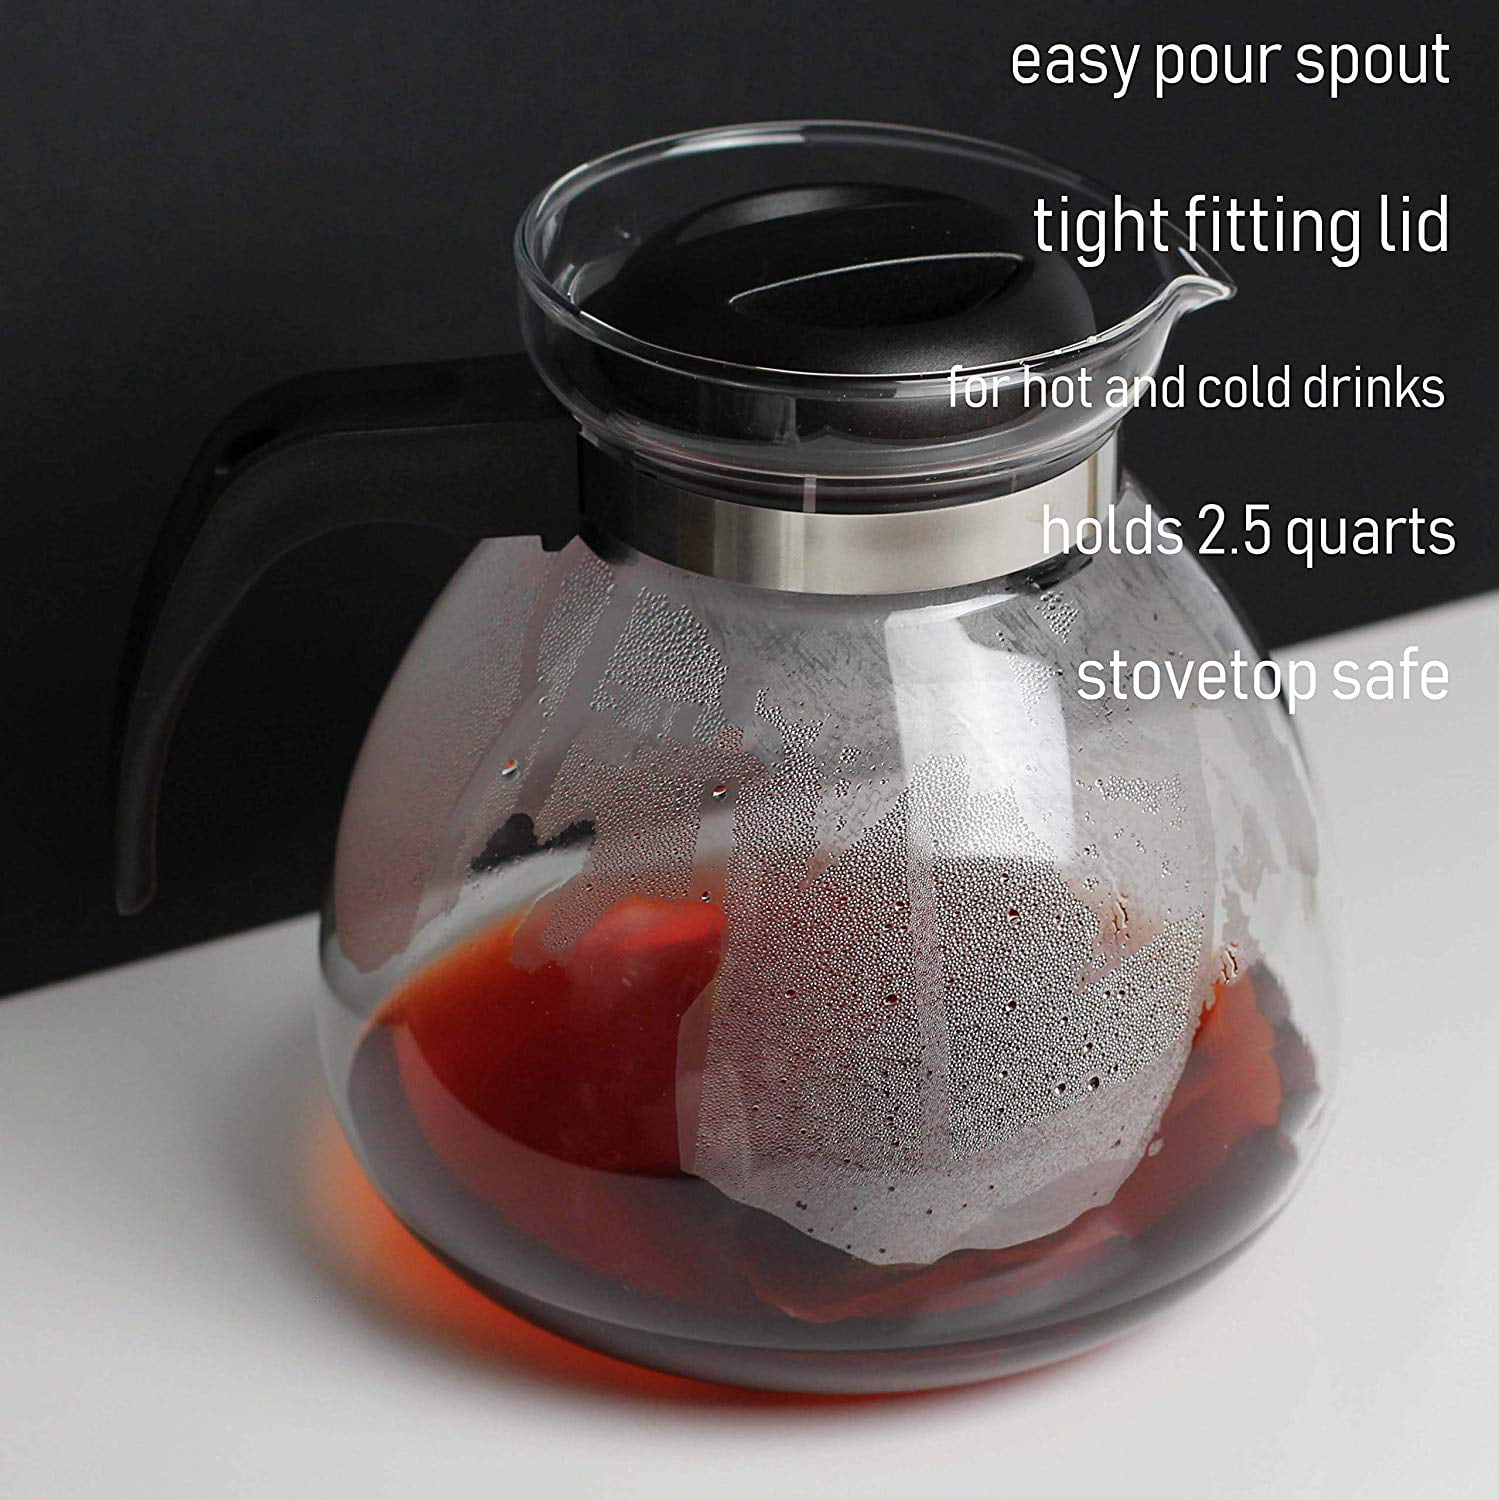 Simax Glass Teapot For Stovetop: Glass Tea Kettle For Stove Top - Tea Pots  For Stove Top - Stovetop & Microwave Safe Kettles For Boiling Water - Clear  Glass Tea Pot With